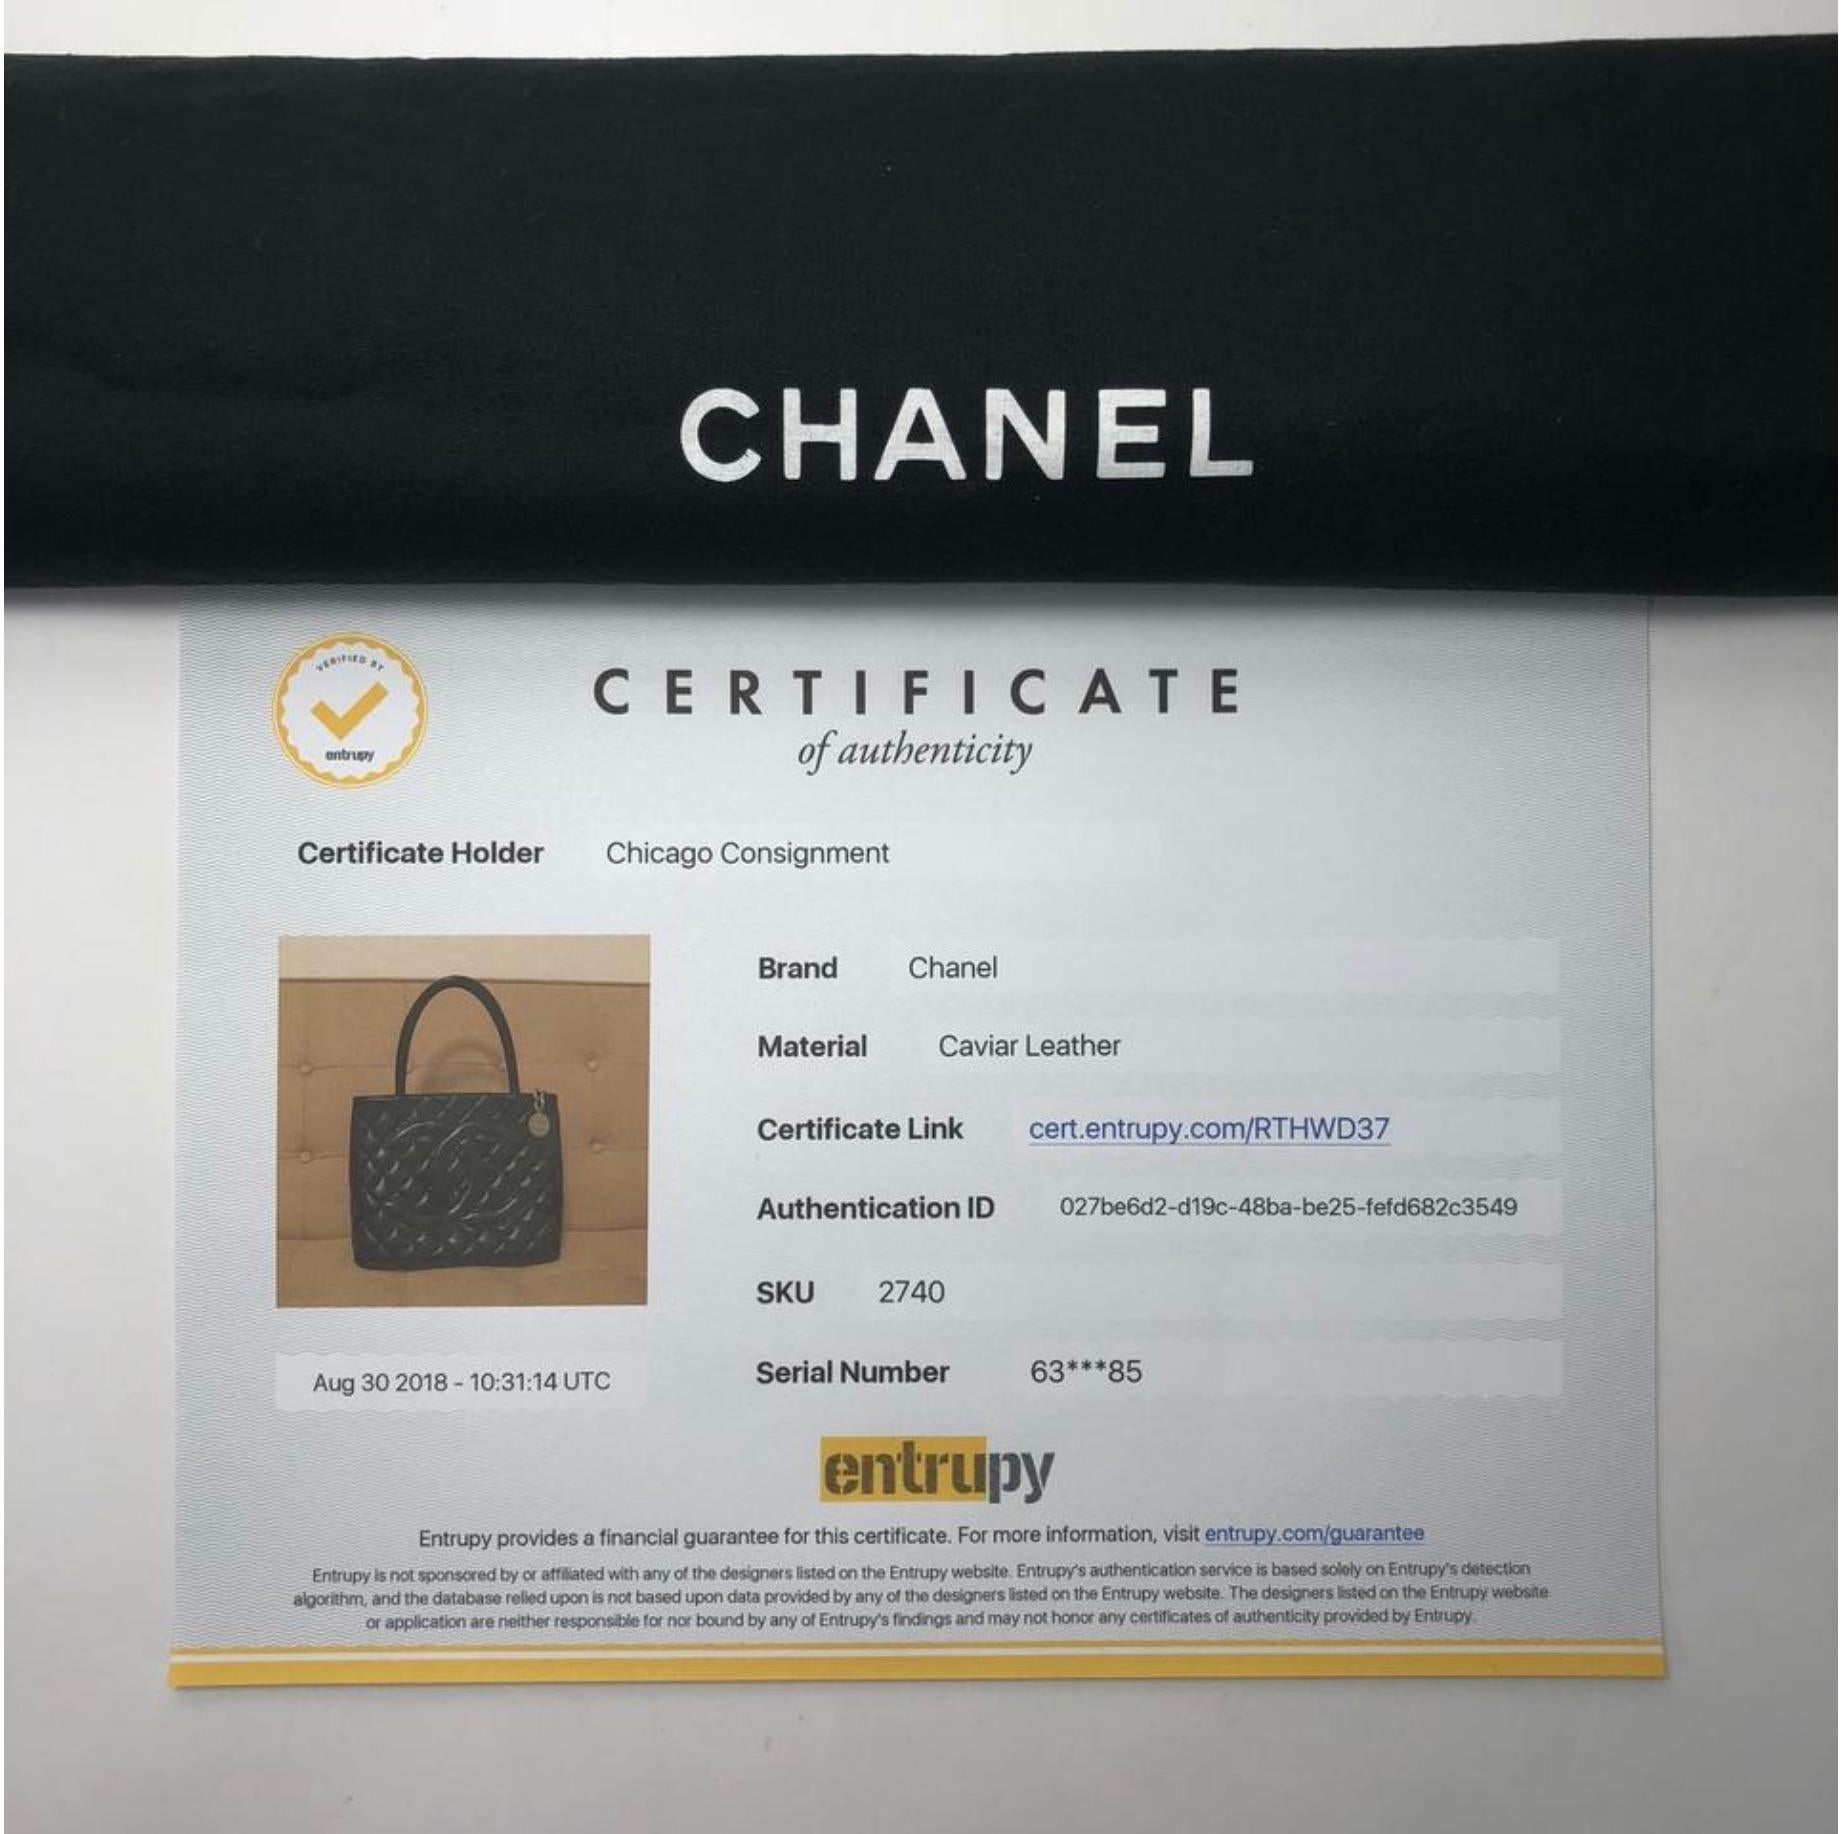 MODEL - Chanel Caviar Leather Medallion with Silver Hardware in Black Shoulder Handbag

CONDITION - Exceptional! No watermarks, no handle darkening, no dryness. Bright and shiny hardware with no tarnishing. No rips, holes, tears, stains or odors.